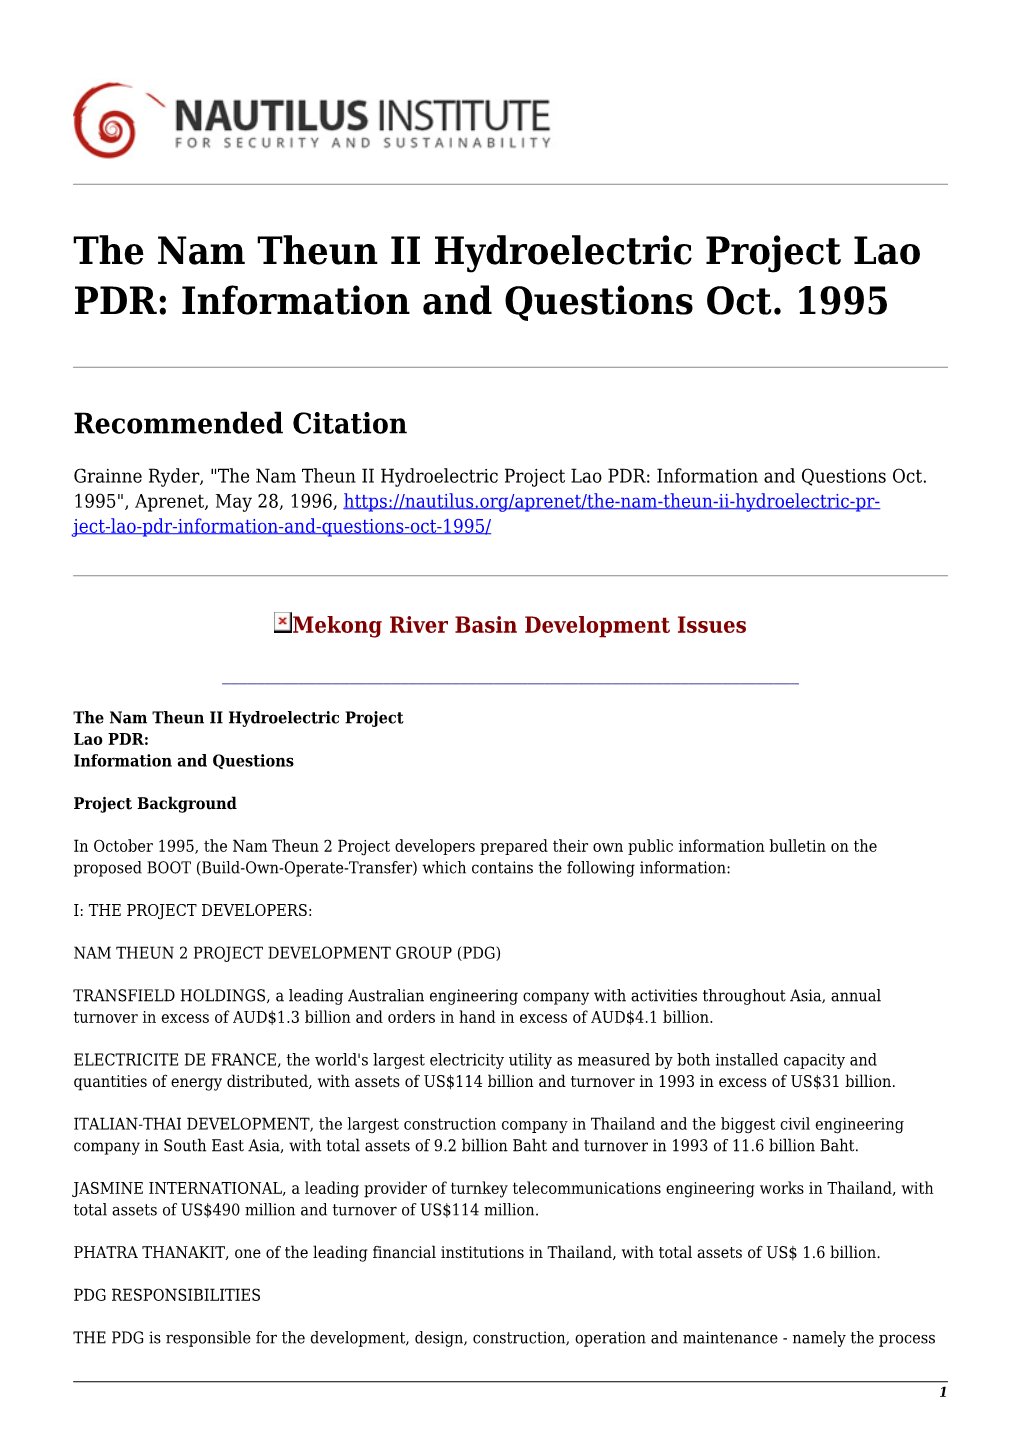 The Nam Theun II Hydroelectric Project Lao PDR: Information and Questions Oct